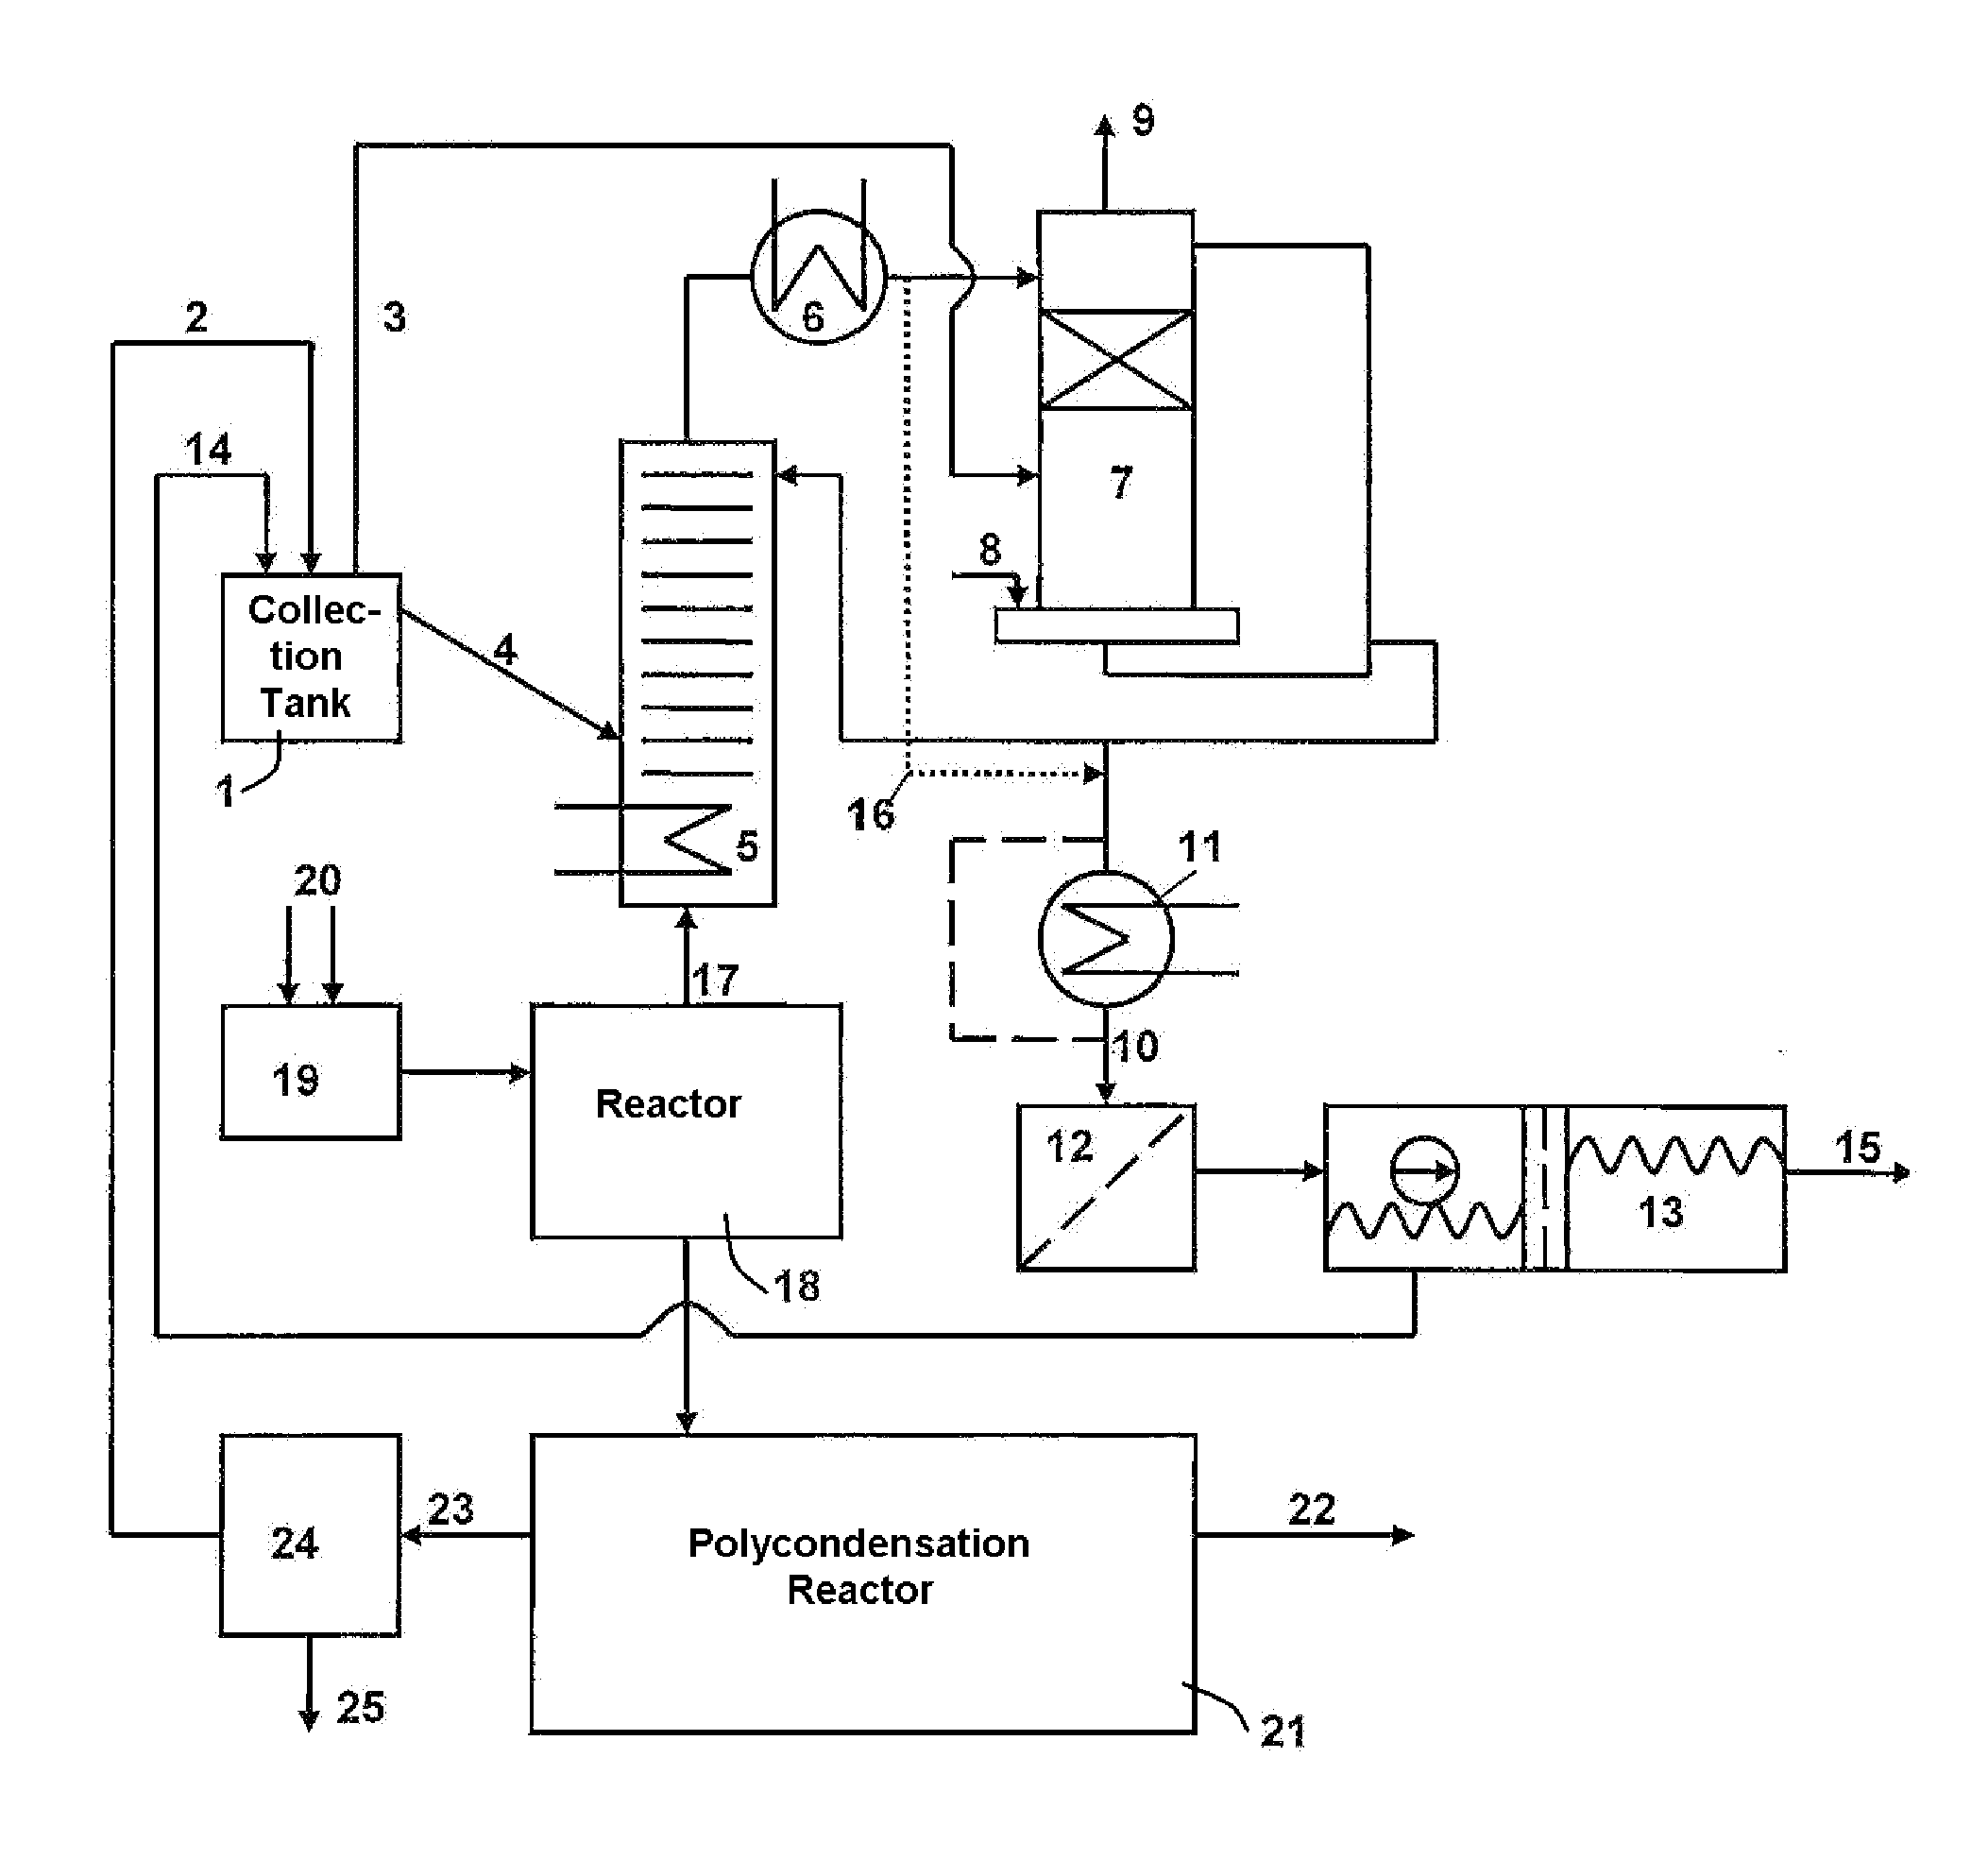 Apparatus for the recovery of ethylene glycol in the production of polyethylene terephthalate